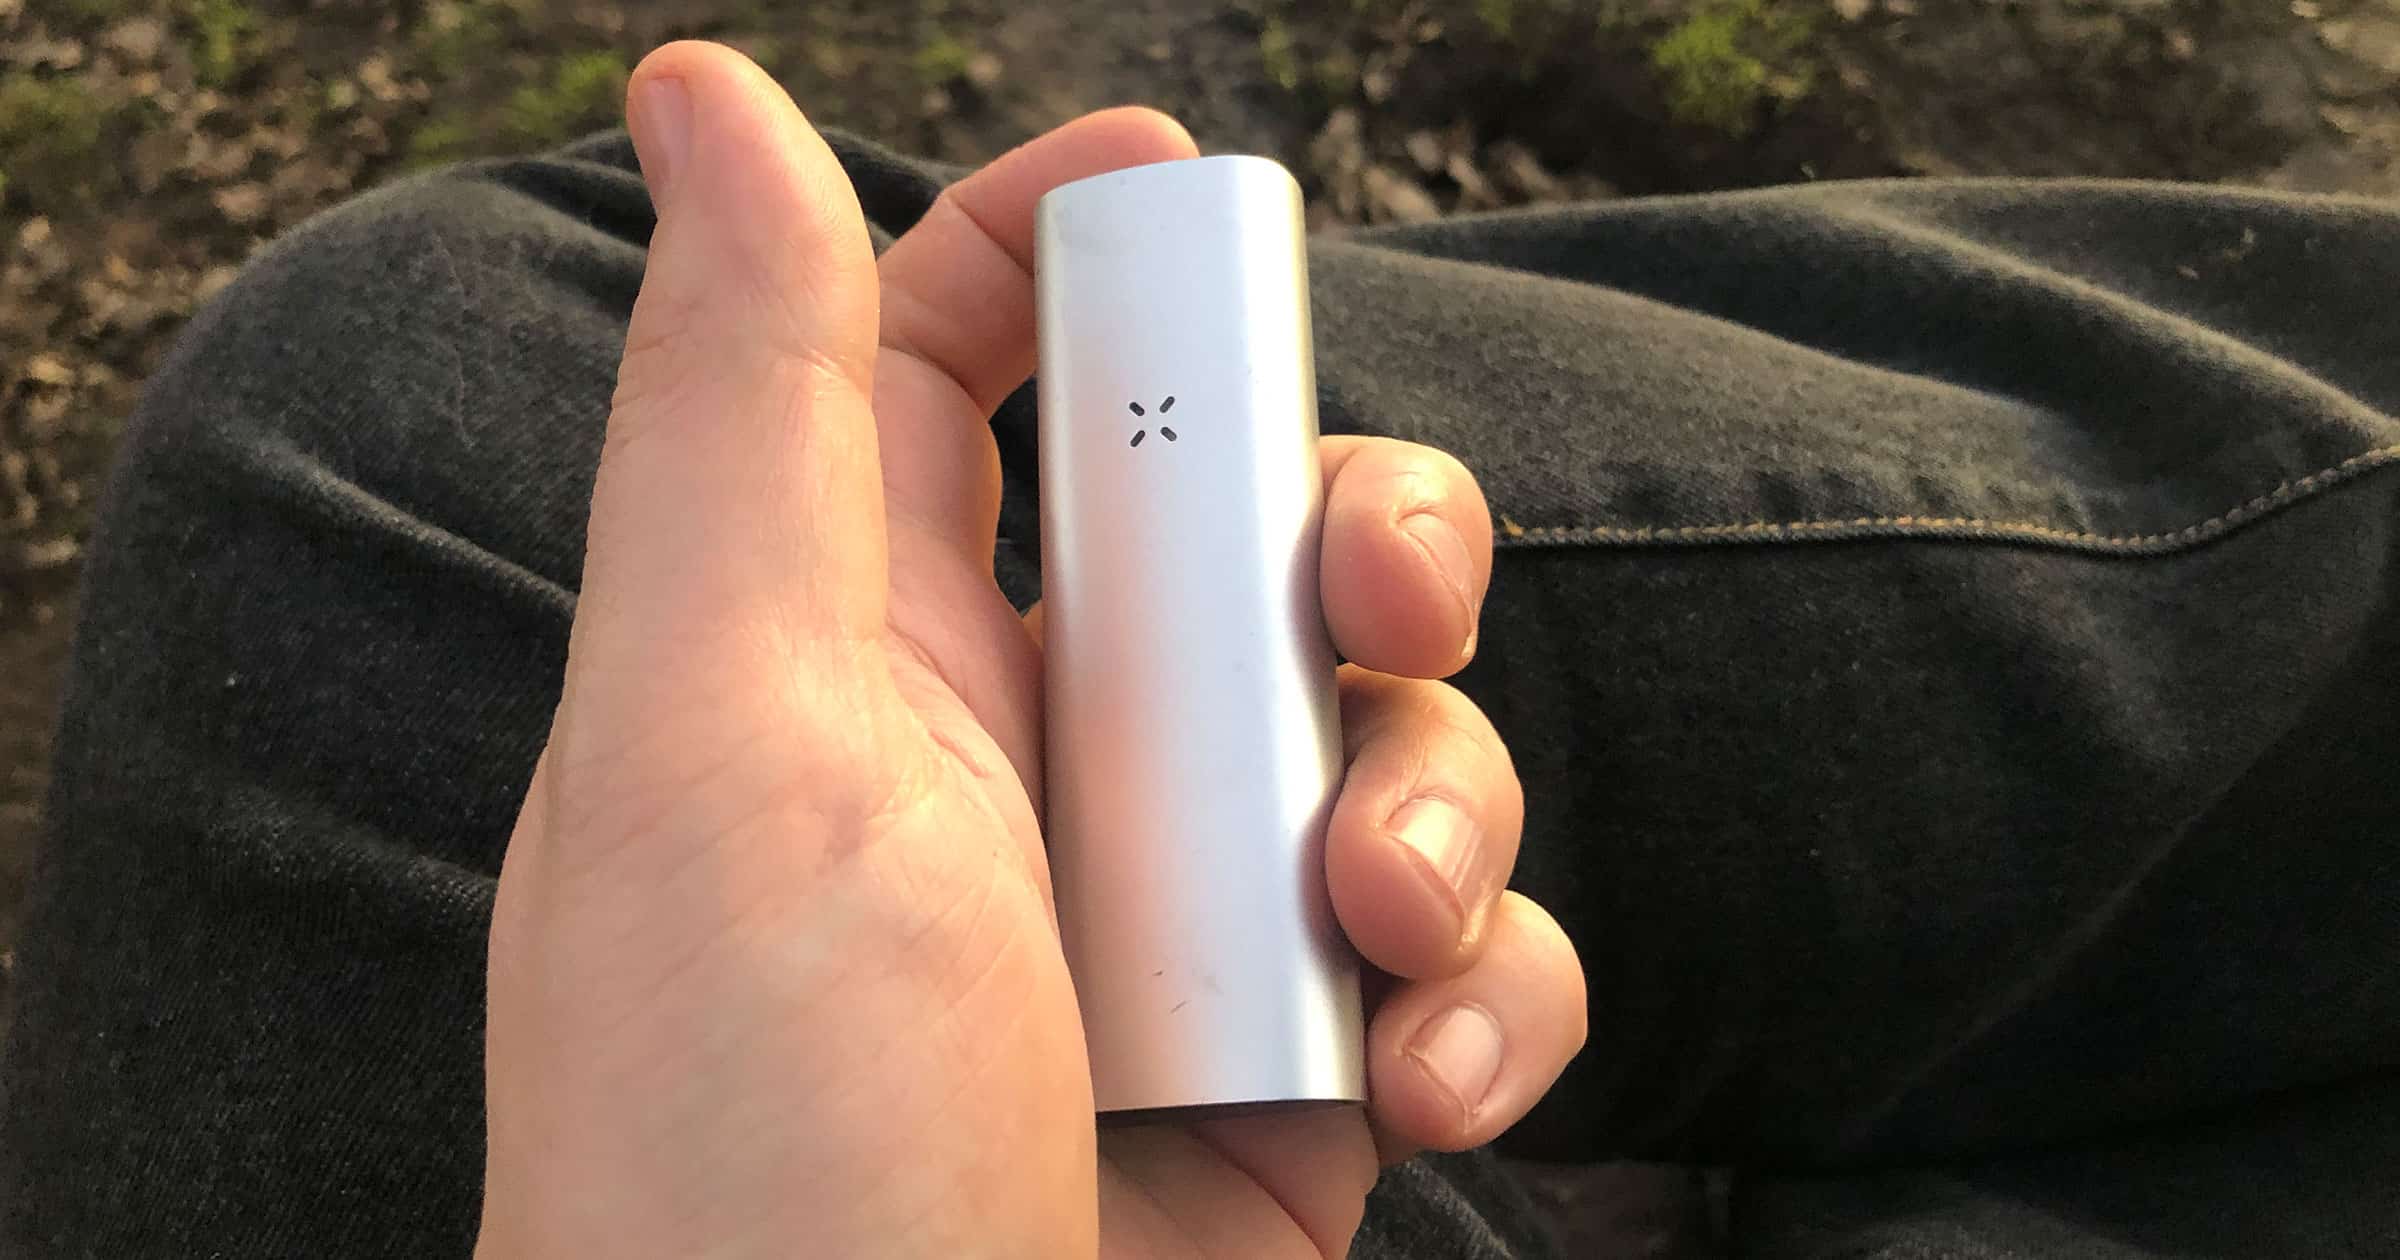 PAX 3 Review & In-Depth Guide